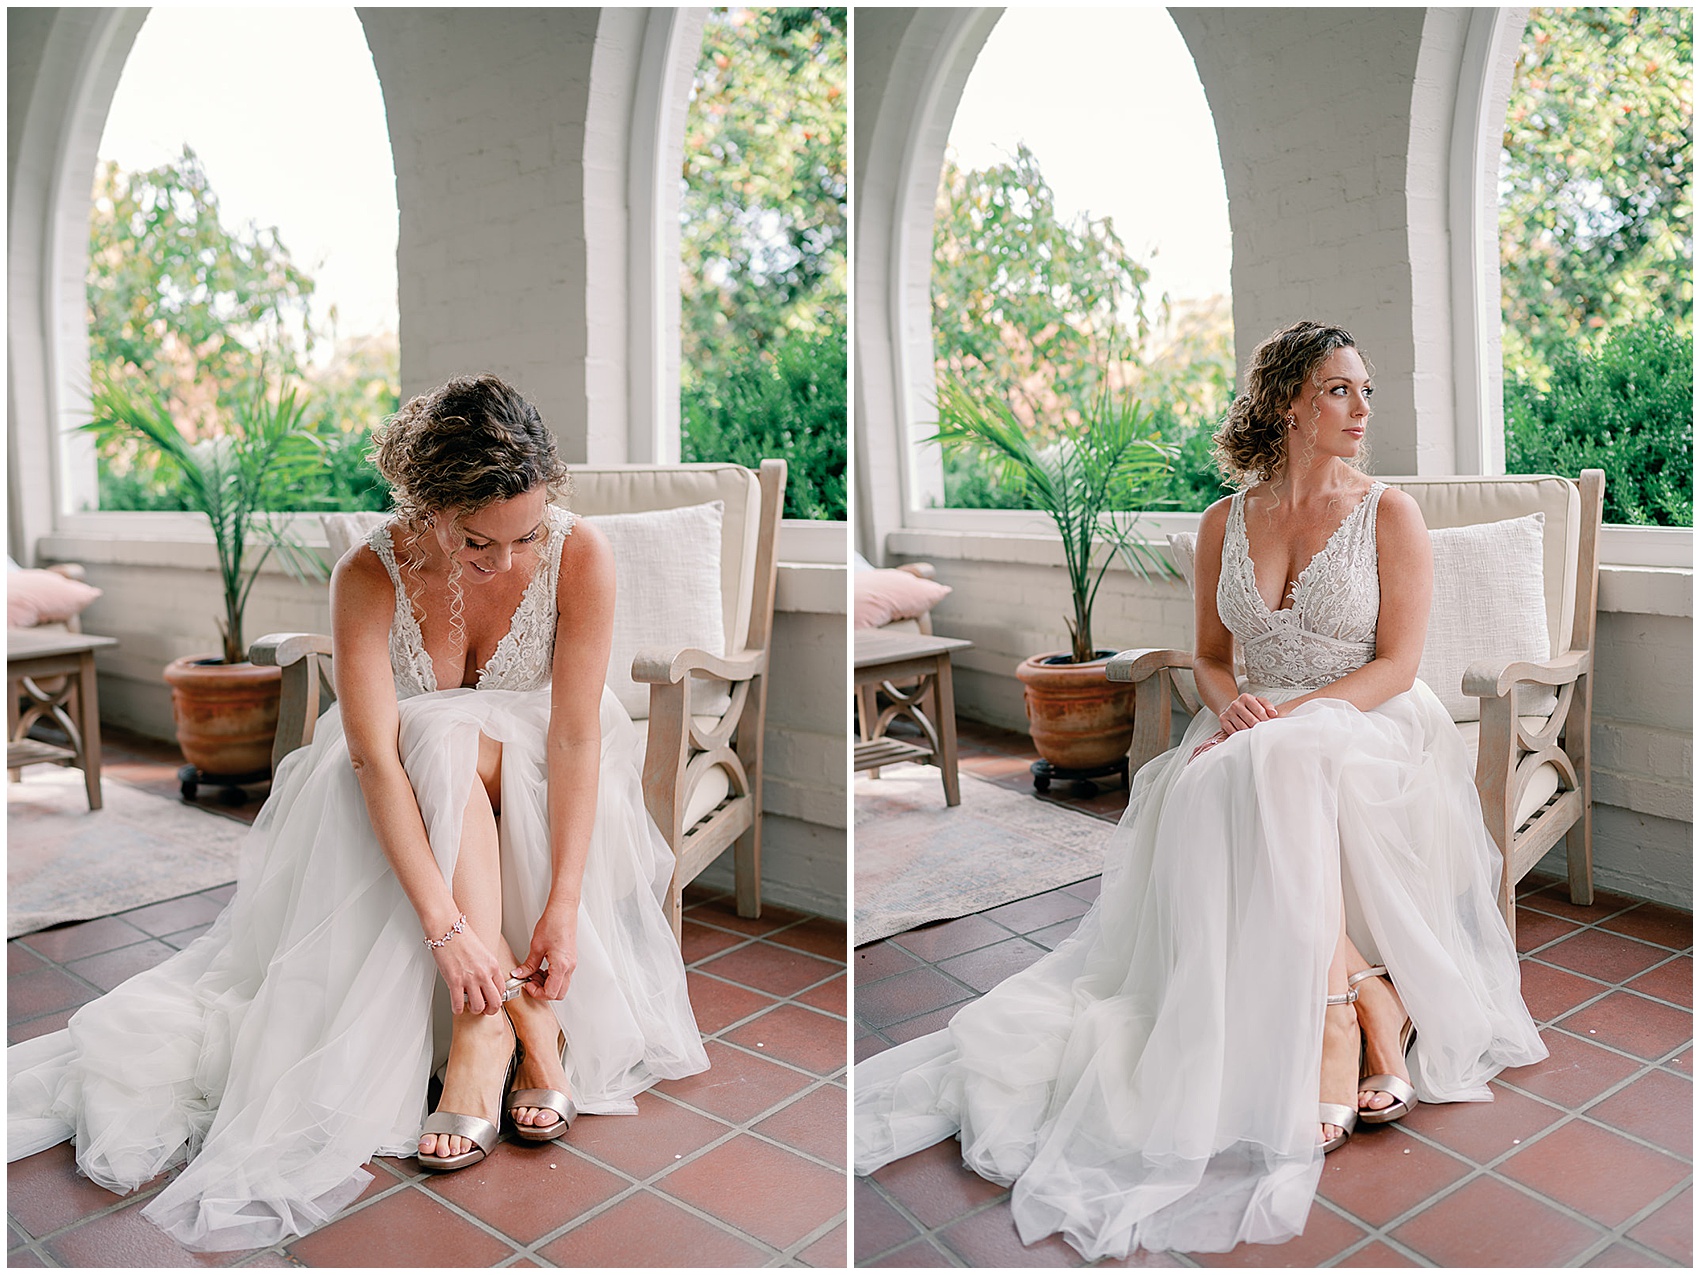 A bride sits in the getting ready room putting on her shoes